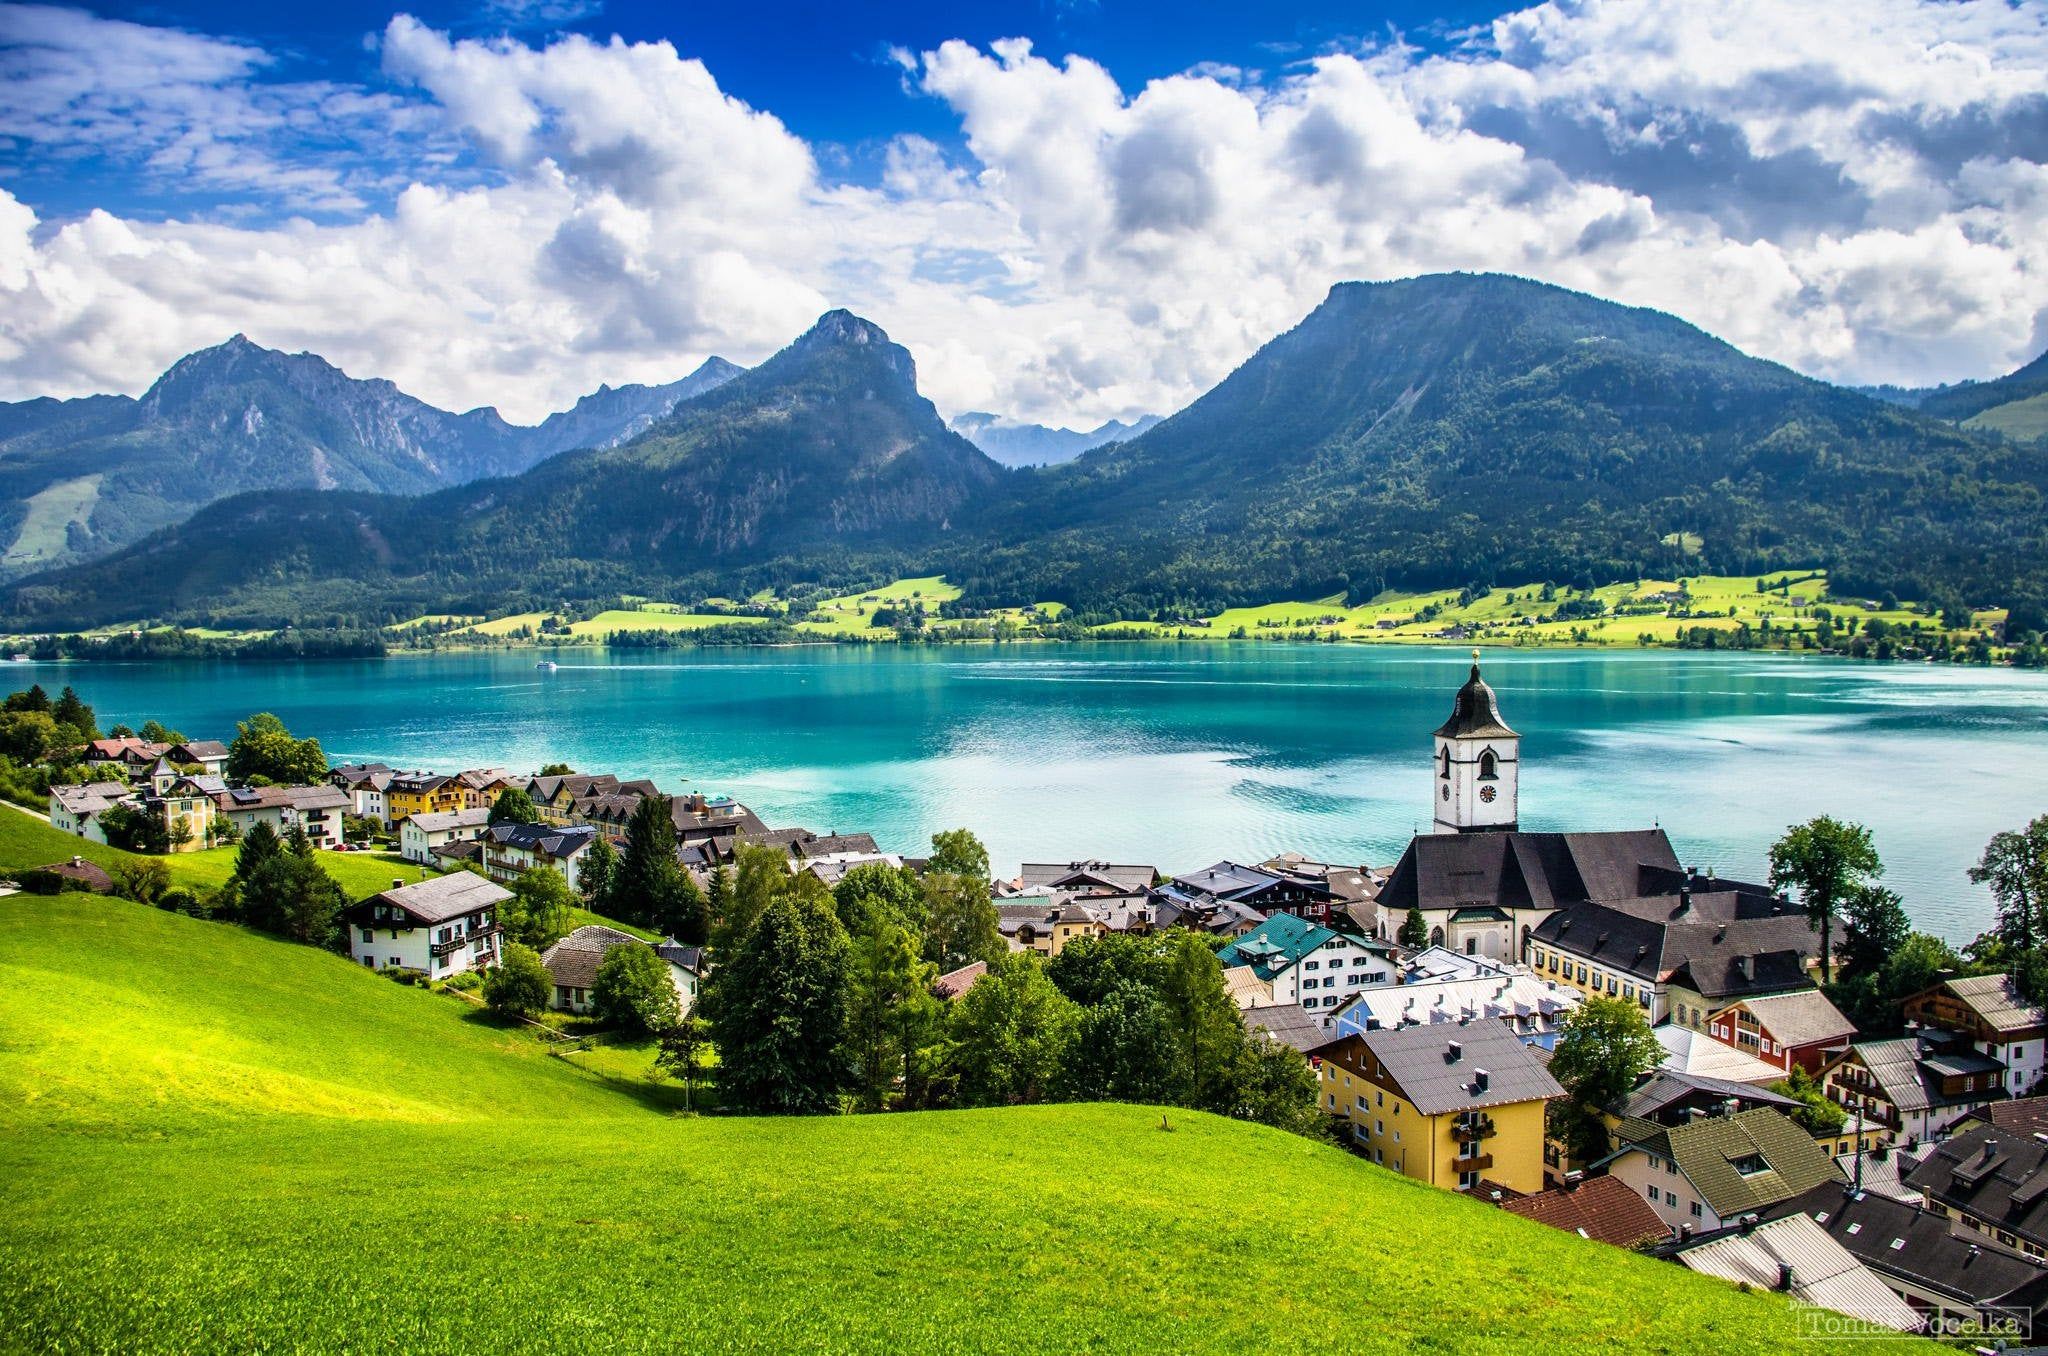 The lakeside village of St. Wolfgang, Austria [2048×1356]